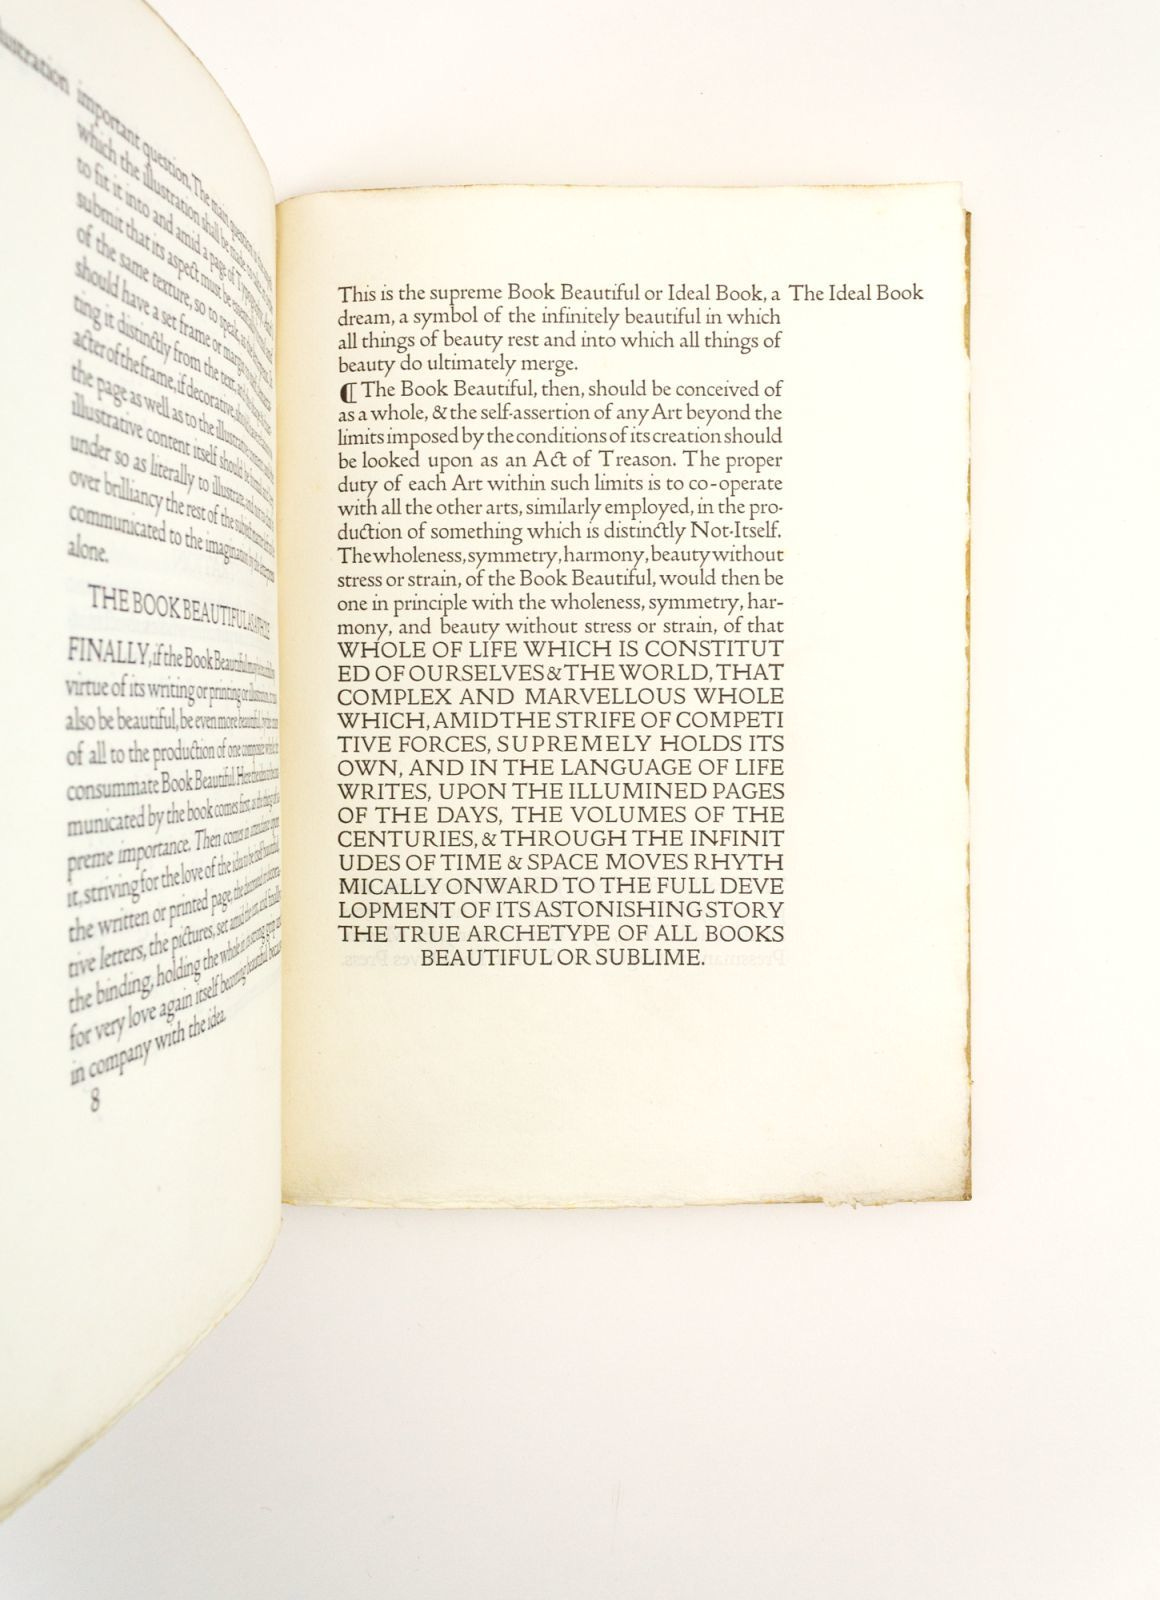 Format and content of early-modern printed books